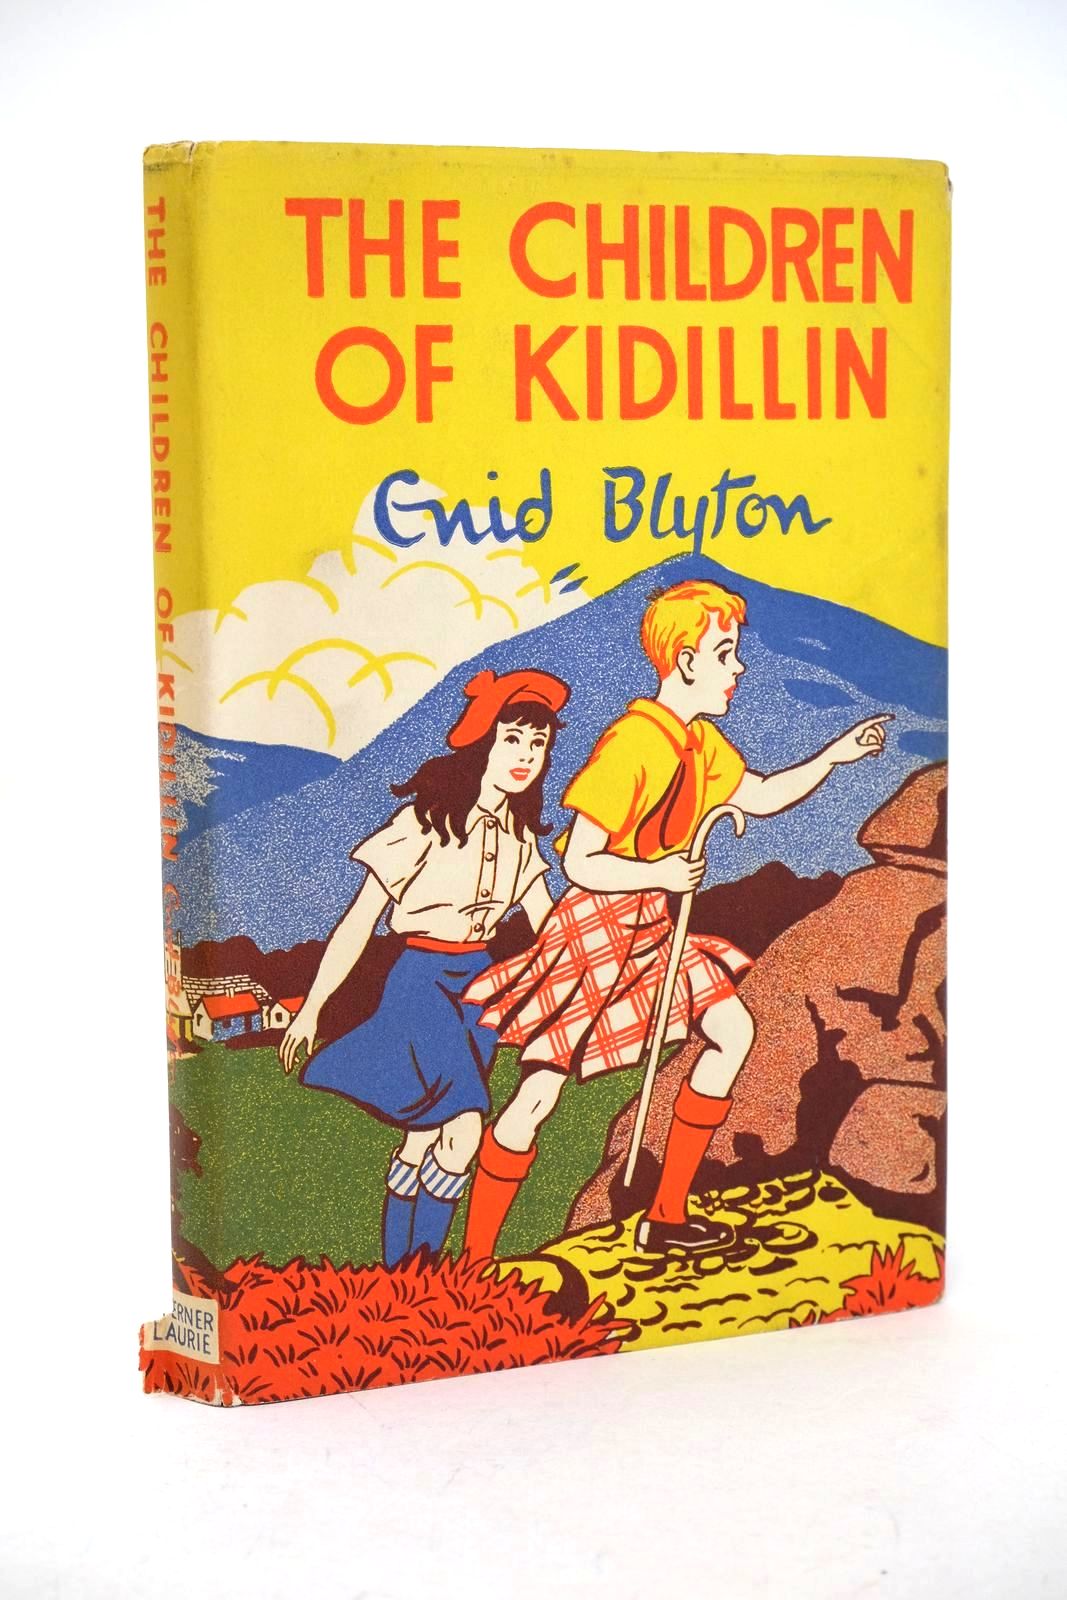 Photo of THE CHILDREN OF KIDILLIN written by Blyton, Enid illustrated by Holland, C. published by Werner Laurie (STOCK CODE: 1326776)  for sale by Stella & Rose's Books